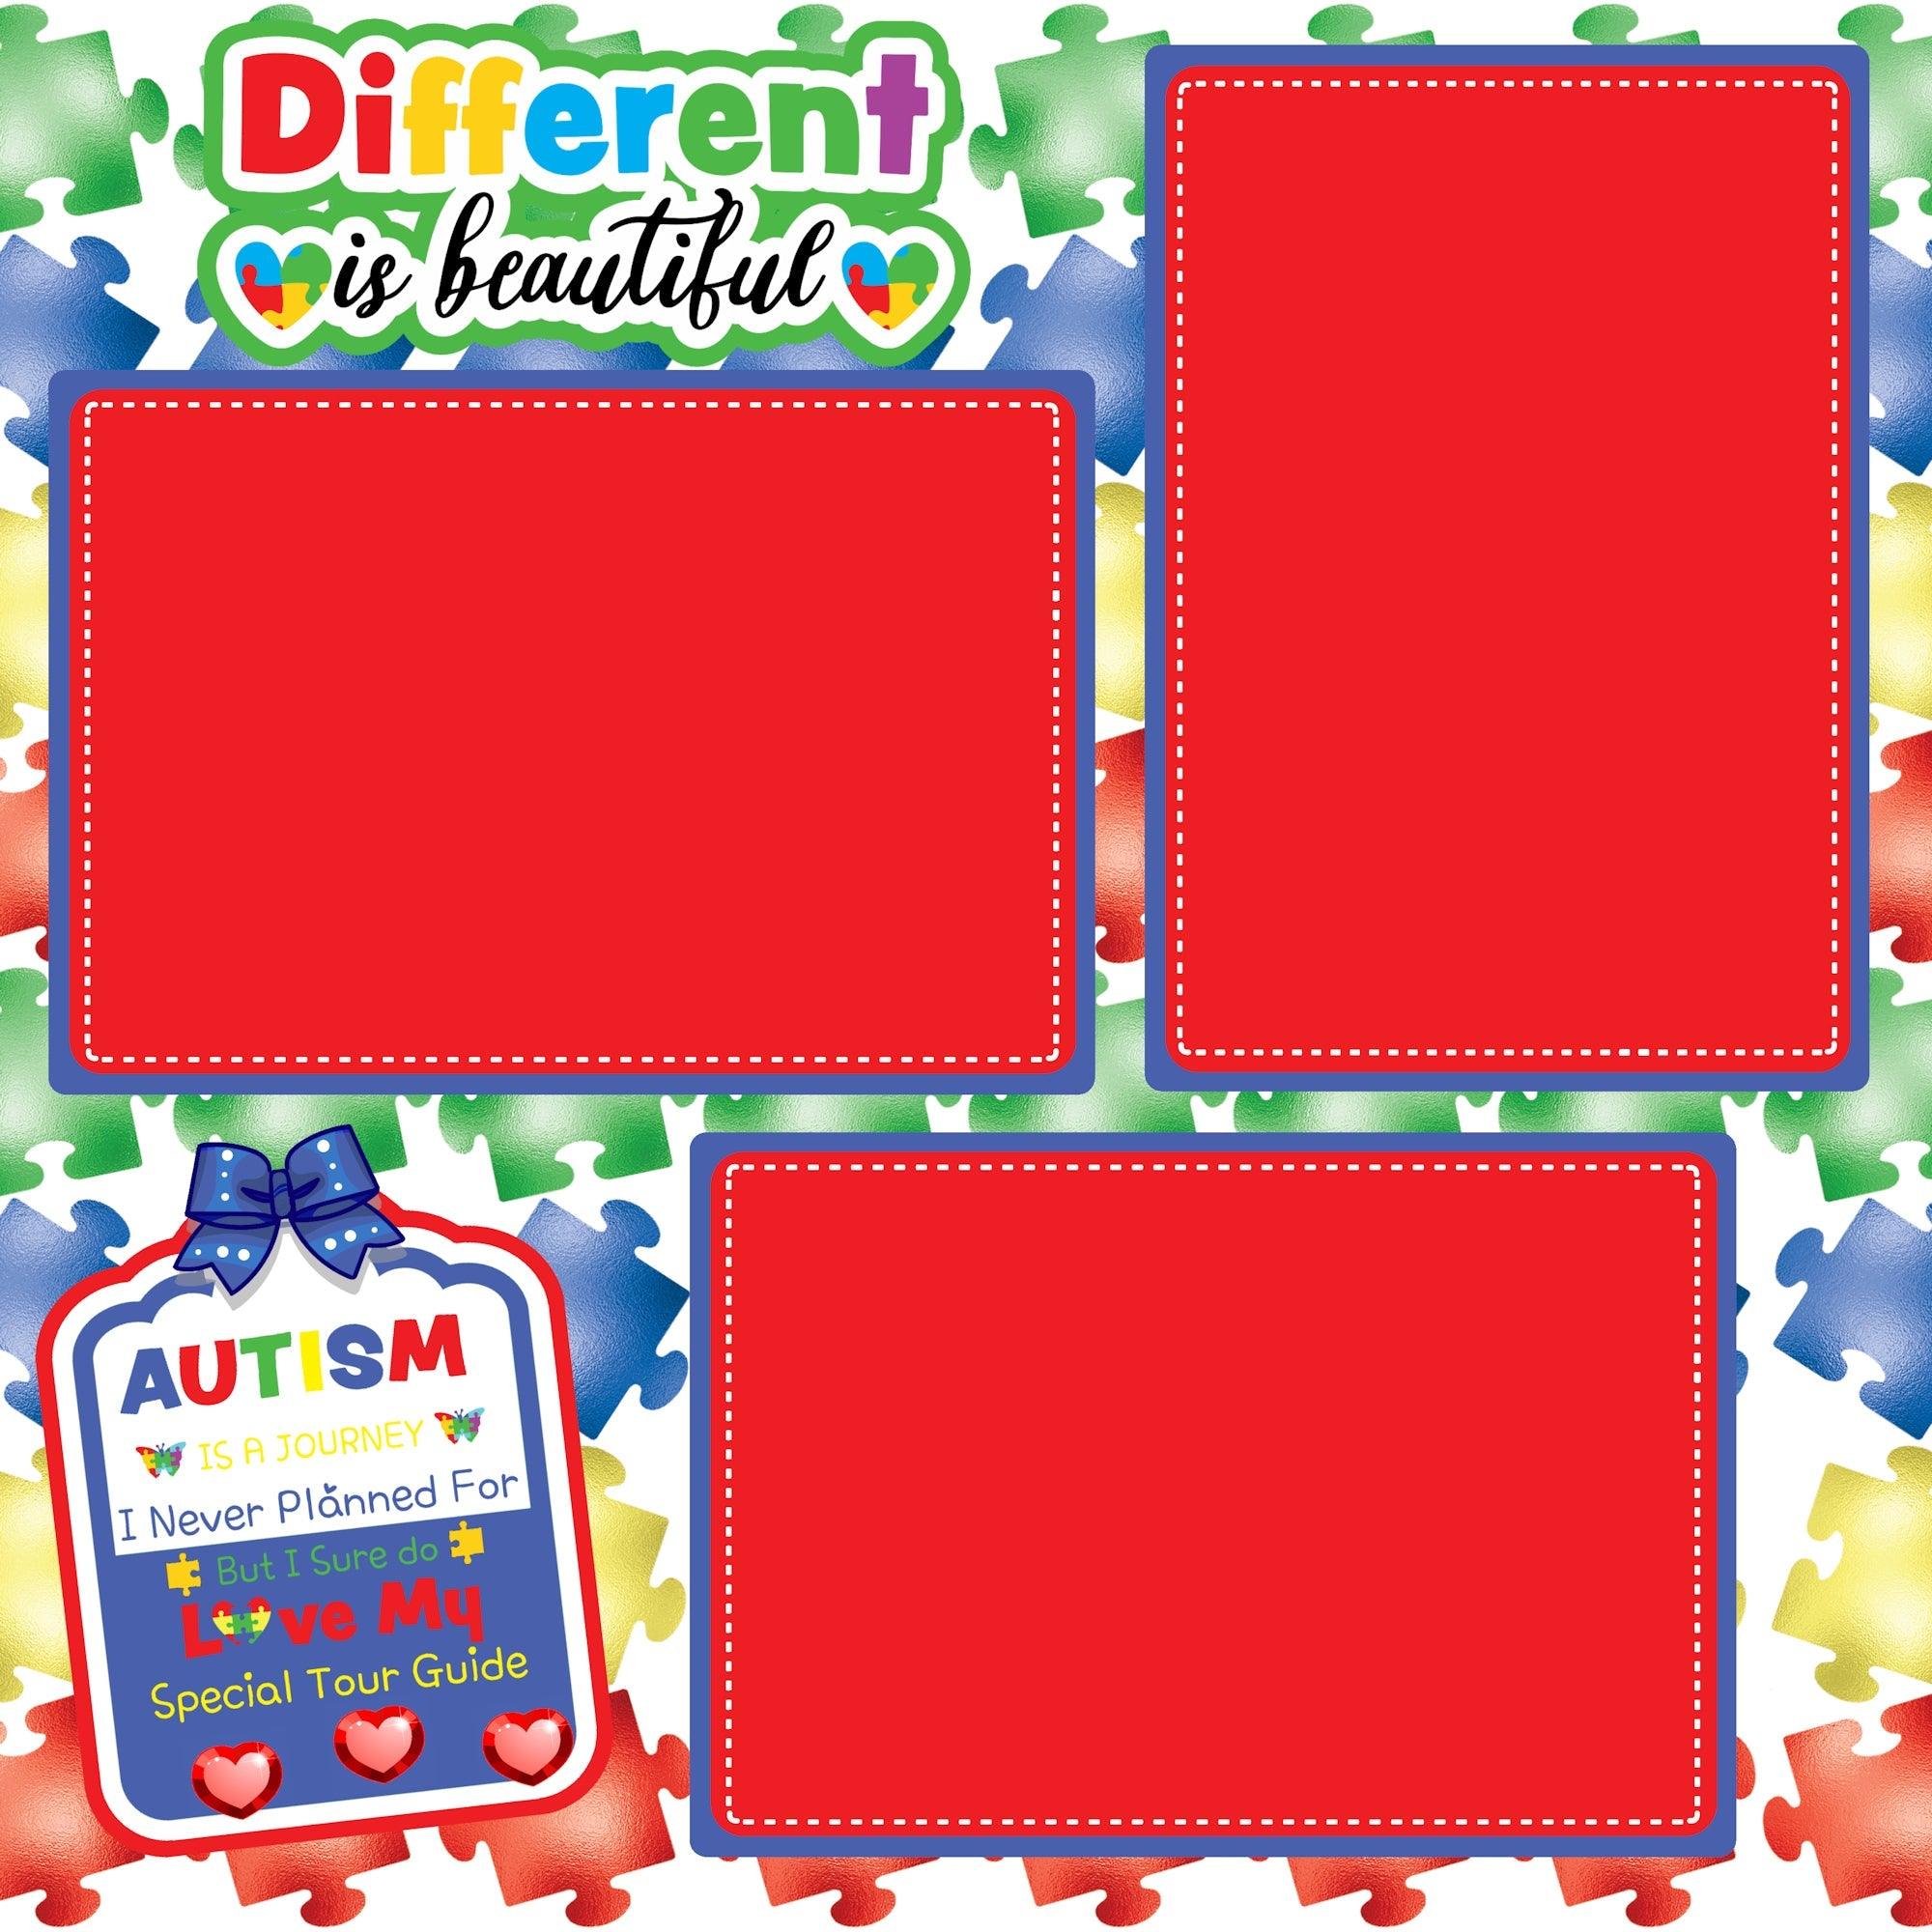 Autism Au-Some (2) - 12 x 12 Premade, Printed Scrapbook Pages by SSC Designs - Scrapbook Supply Companies